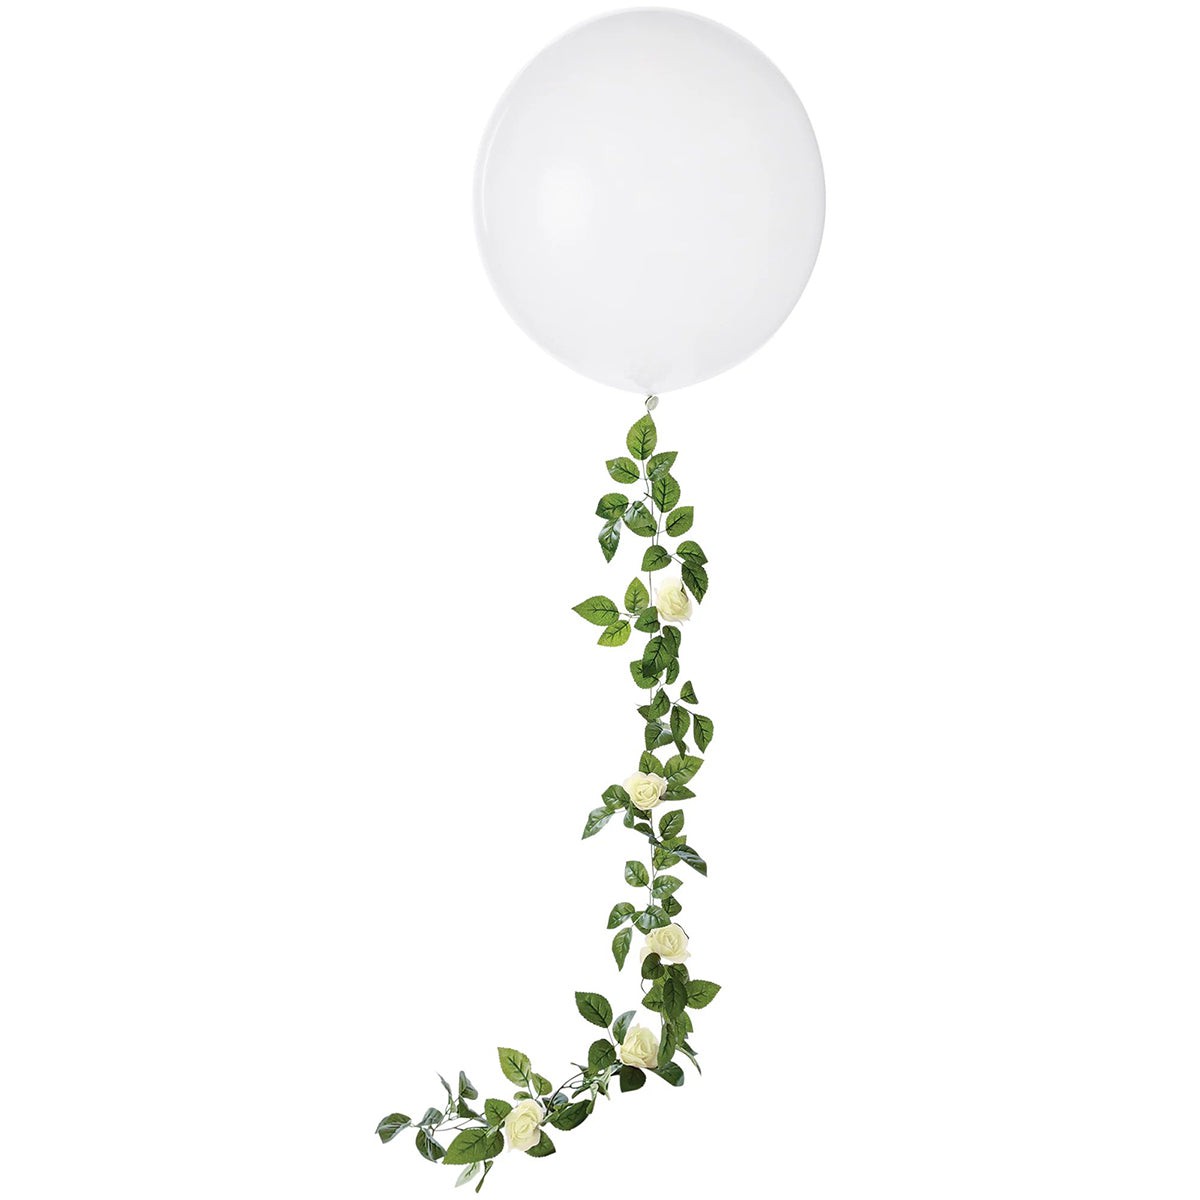 AMSCAN CA Bridal Shower Bridal Shower White Latex Balloon With White Flowers, Luxurious Shower Collection, 24 Inches, 1 Count 192937323175